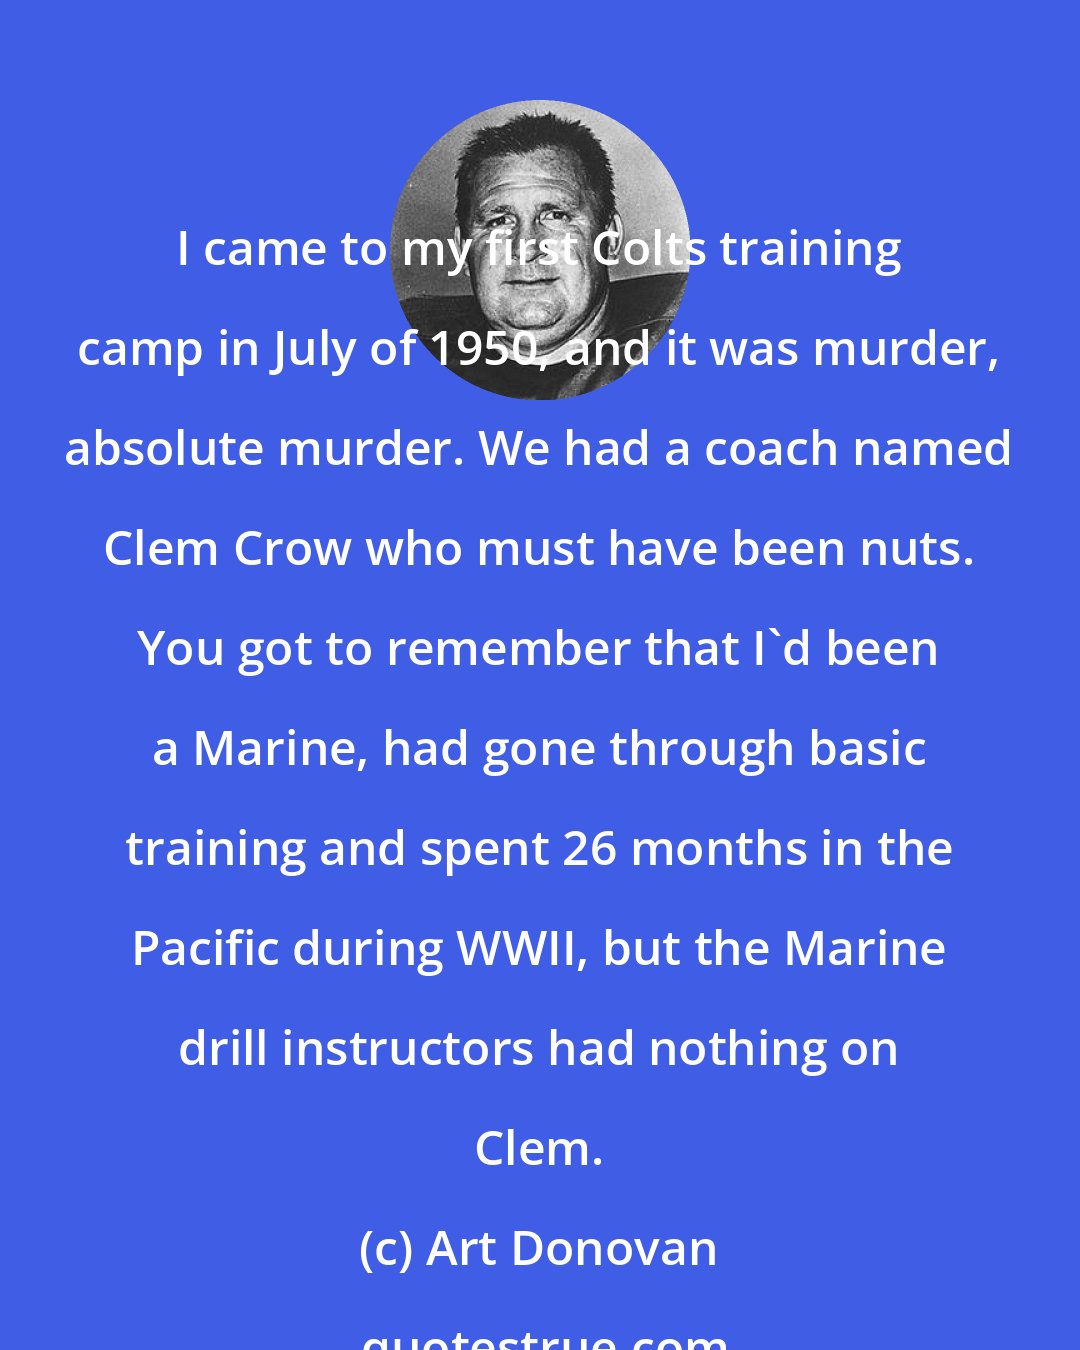 Art Donovan: I came to my first Colts training camp in July of 1950, and it was murder, absolute murder. We had a coach named Clem Crow who must have been nuts. You got to remember that I'd been a Marine, had gone through basic training and spent 26 months in the Pacific during WWII, but the Marine drill instructors had nothing on Clem.